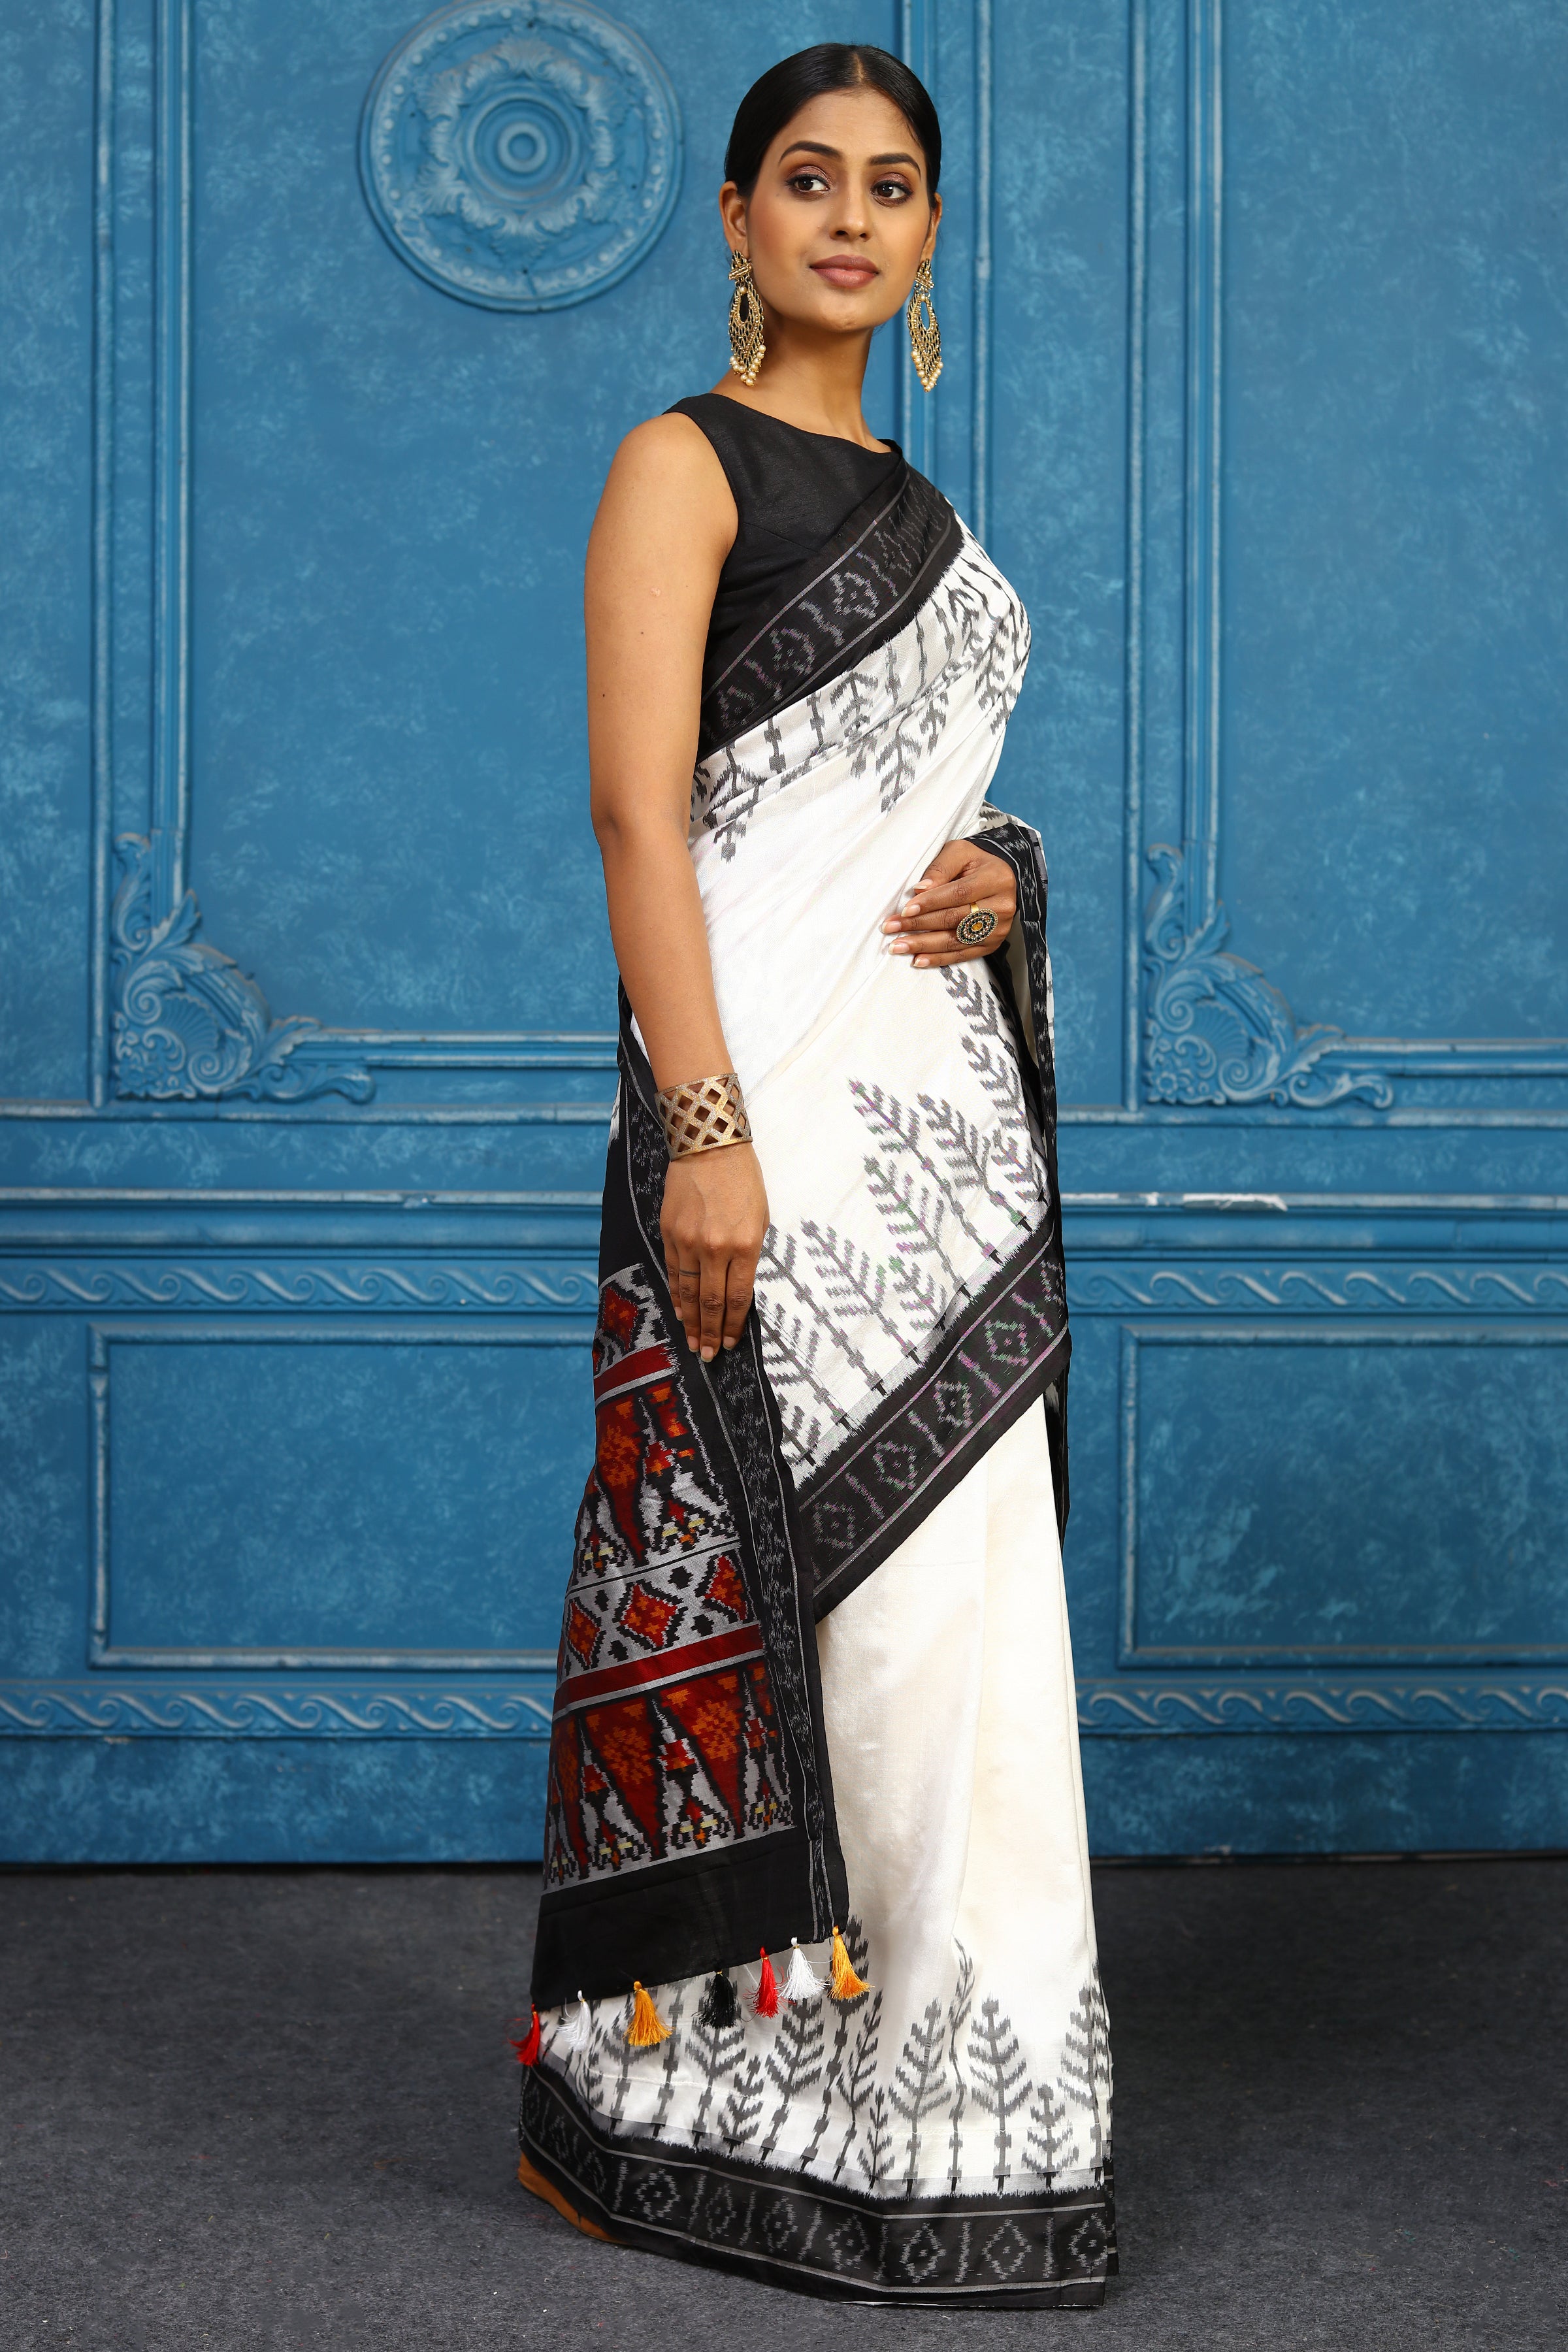 Buy off-white pochampally silk ikkat sari online in USA with black border. Look your best on festive occasions in latest designer sarees, pure silk sarees, Kanchipuram sarees, handwoven sarees, tussar silk sarees, embroidered sarees from Pure Elegance Indian clothing store in USA.-side